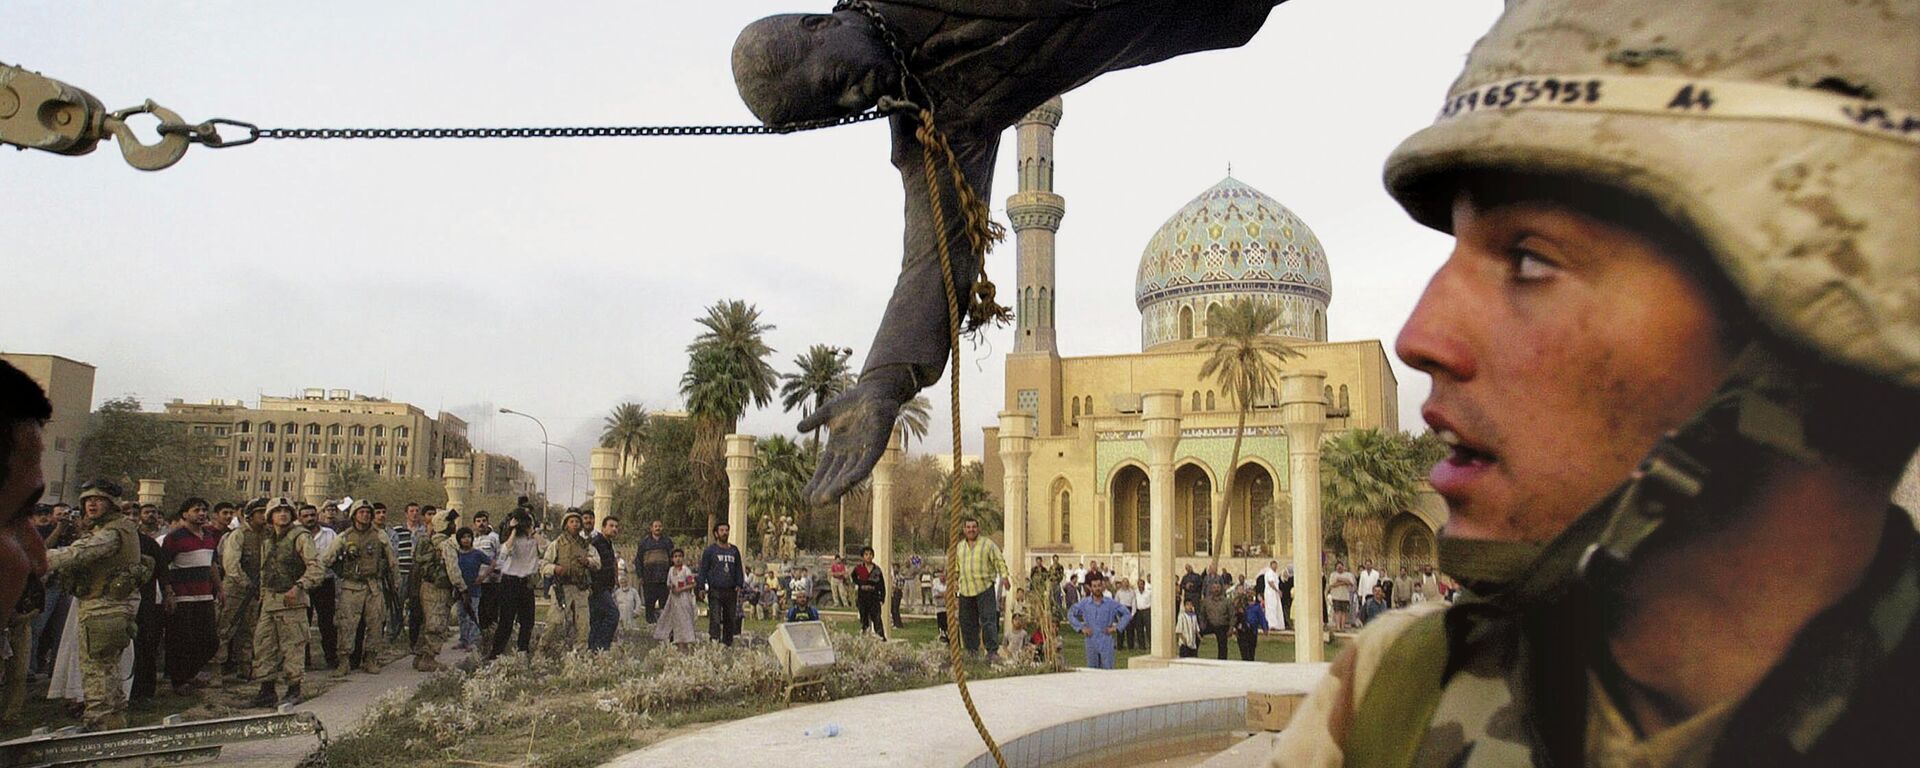 FILE - Iraqi civilians and U.S. soldiers pull down a statue of Saddam Hussein in downtown Baghdad, in this April 9, 2003 file photo. The U.S. invaded Iraq on false claims that Hussein was hiding weapons of mass destruction.  - Sputnik International, 1920, 20.03.2023